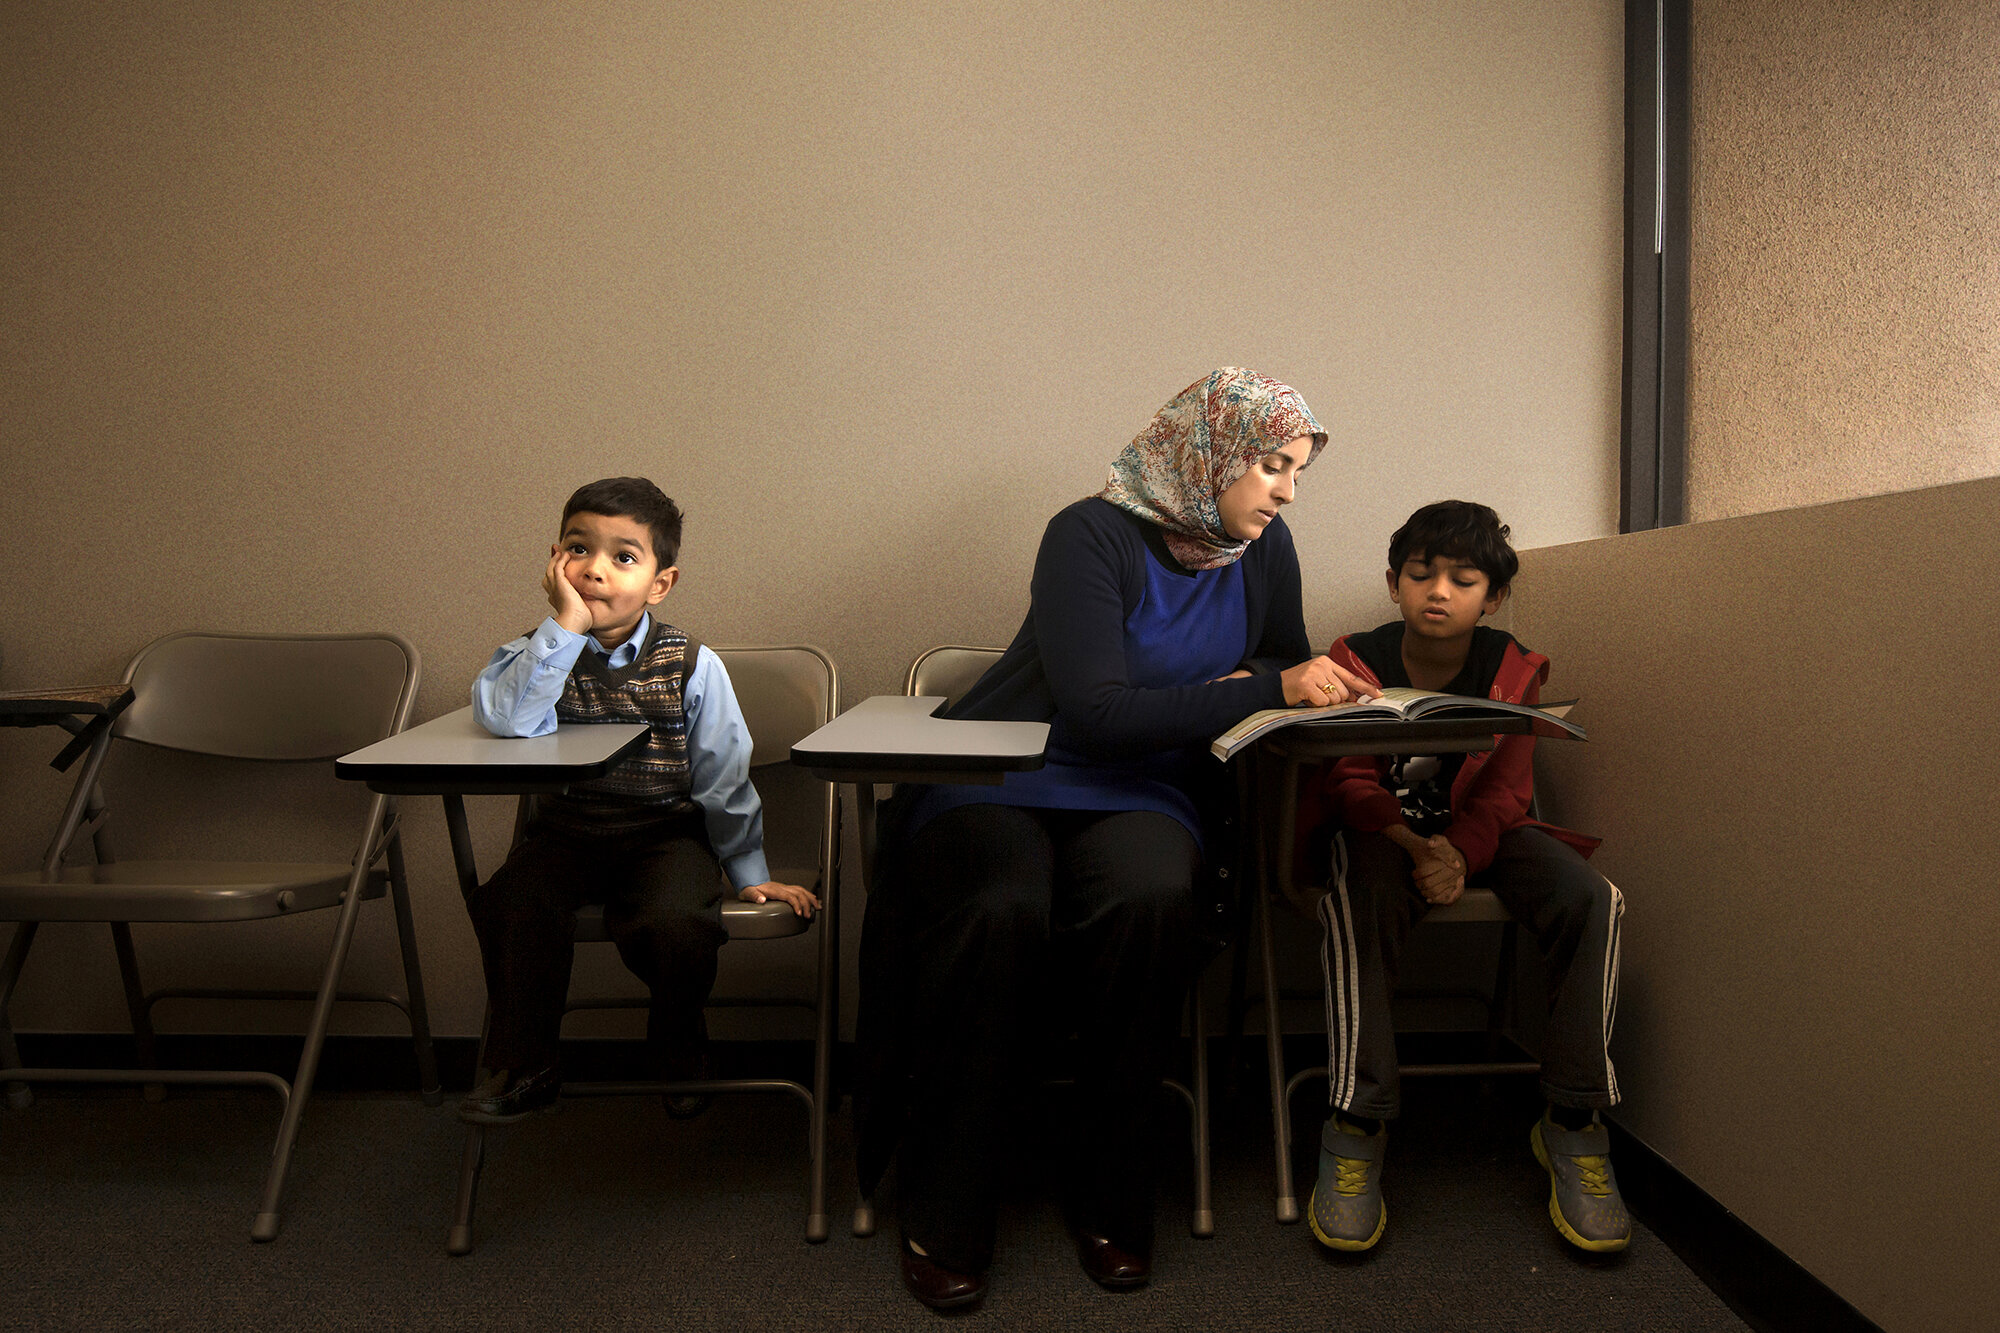   USA. Pleasanton, California. 2018. A teacher (center) with a student during a Sunday Quran class while her son (left) waits for her.  